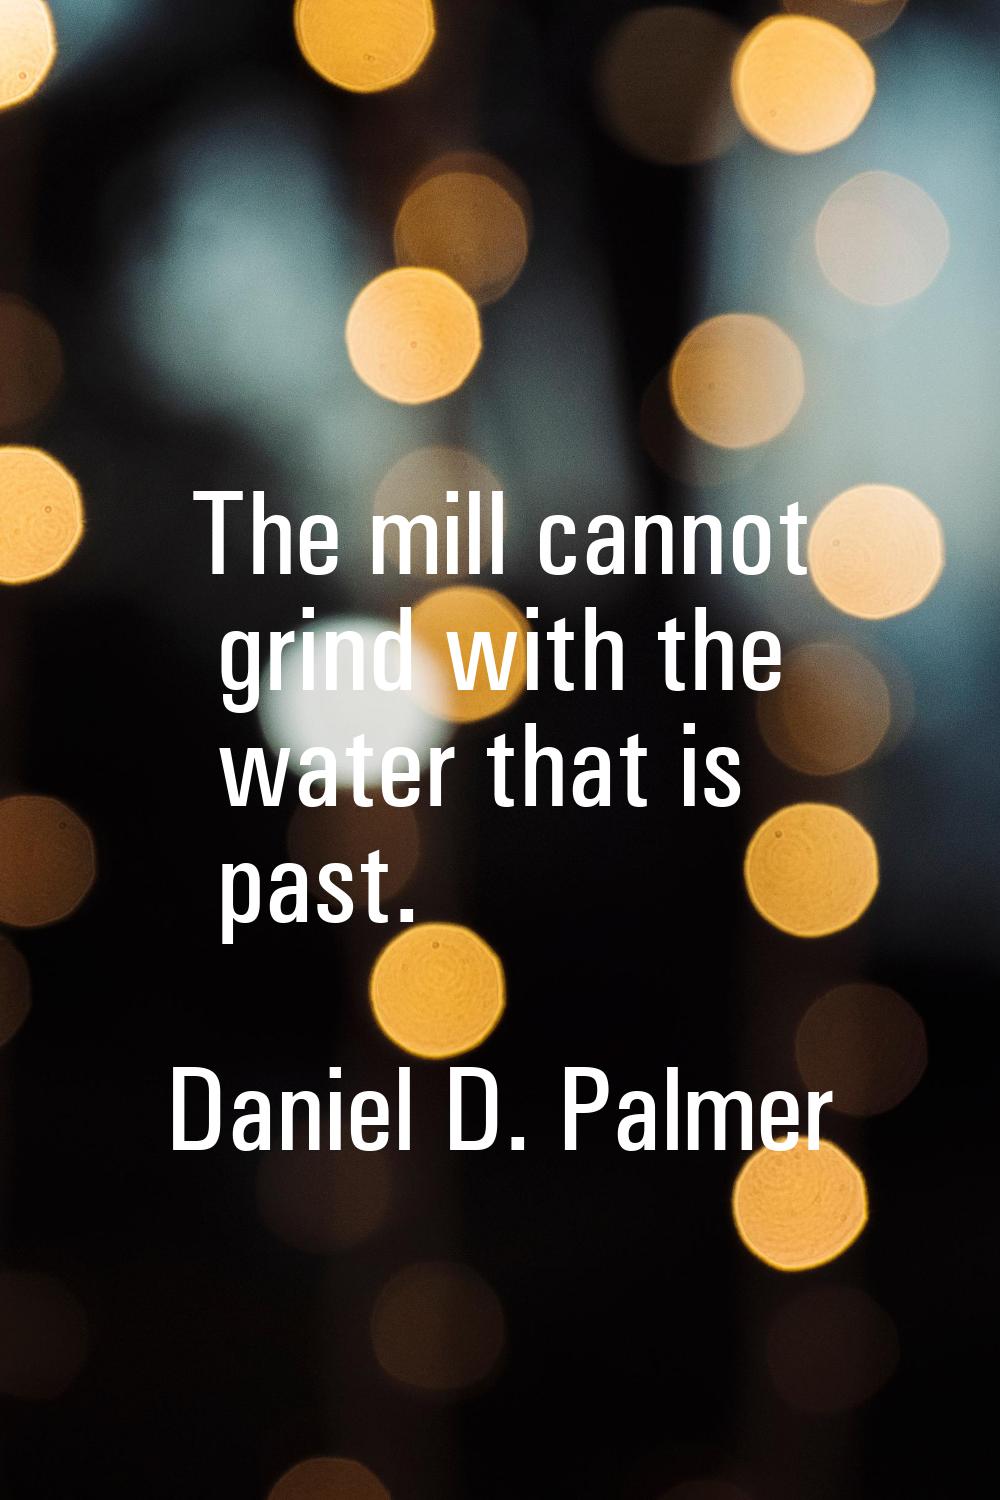 The mill cannot grind with the water that is past.